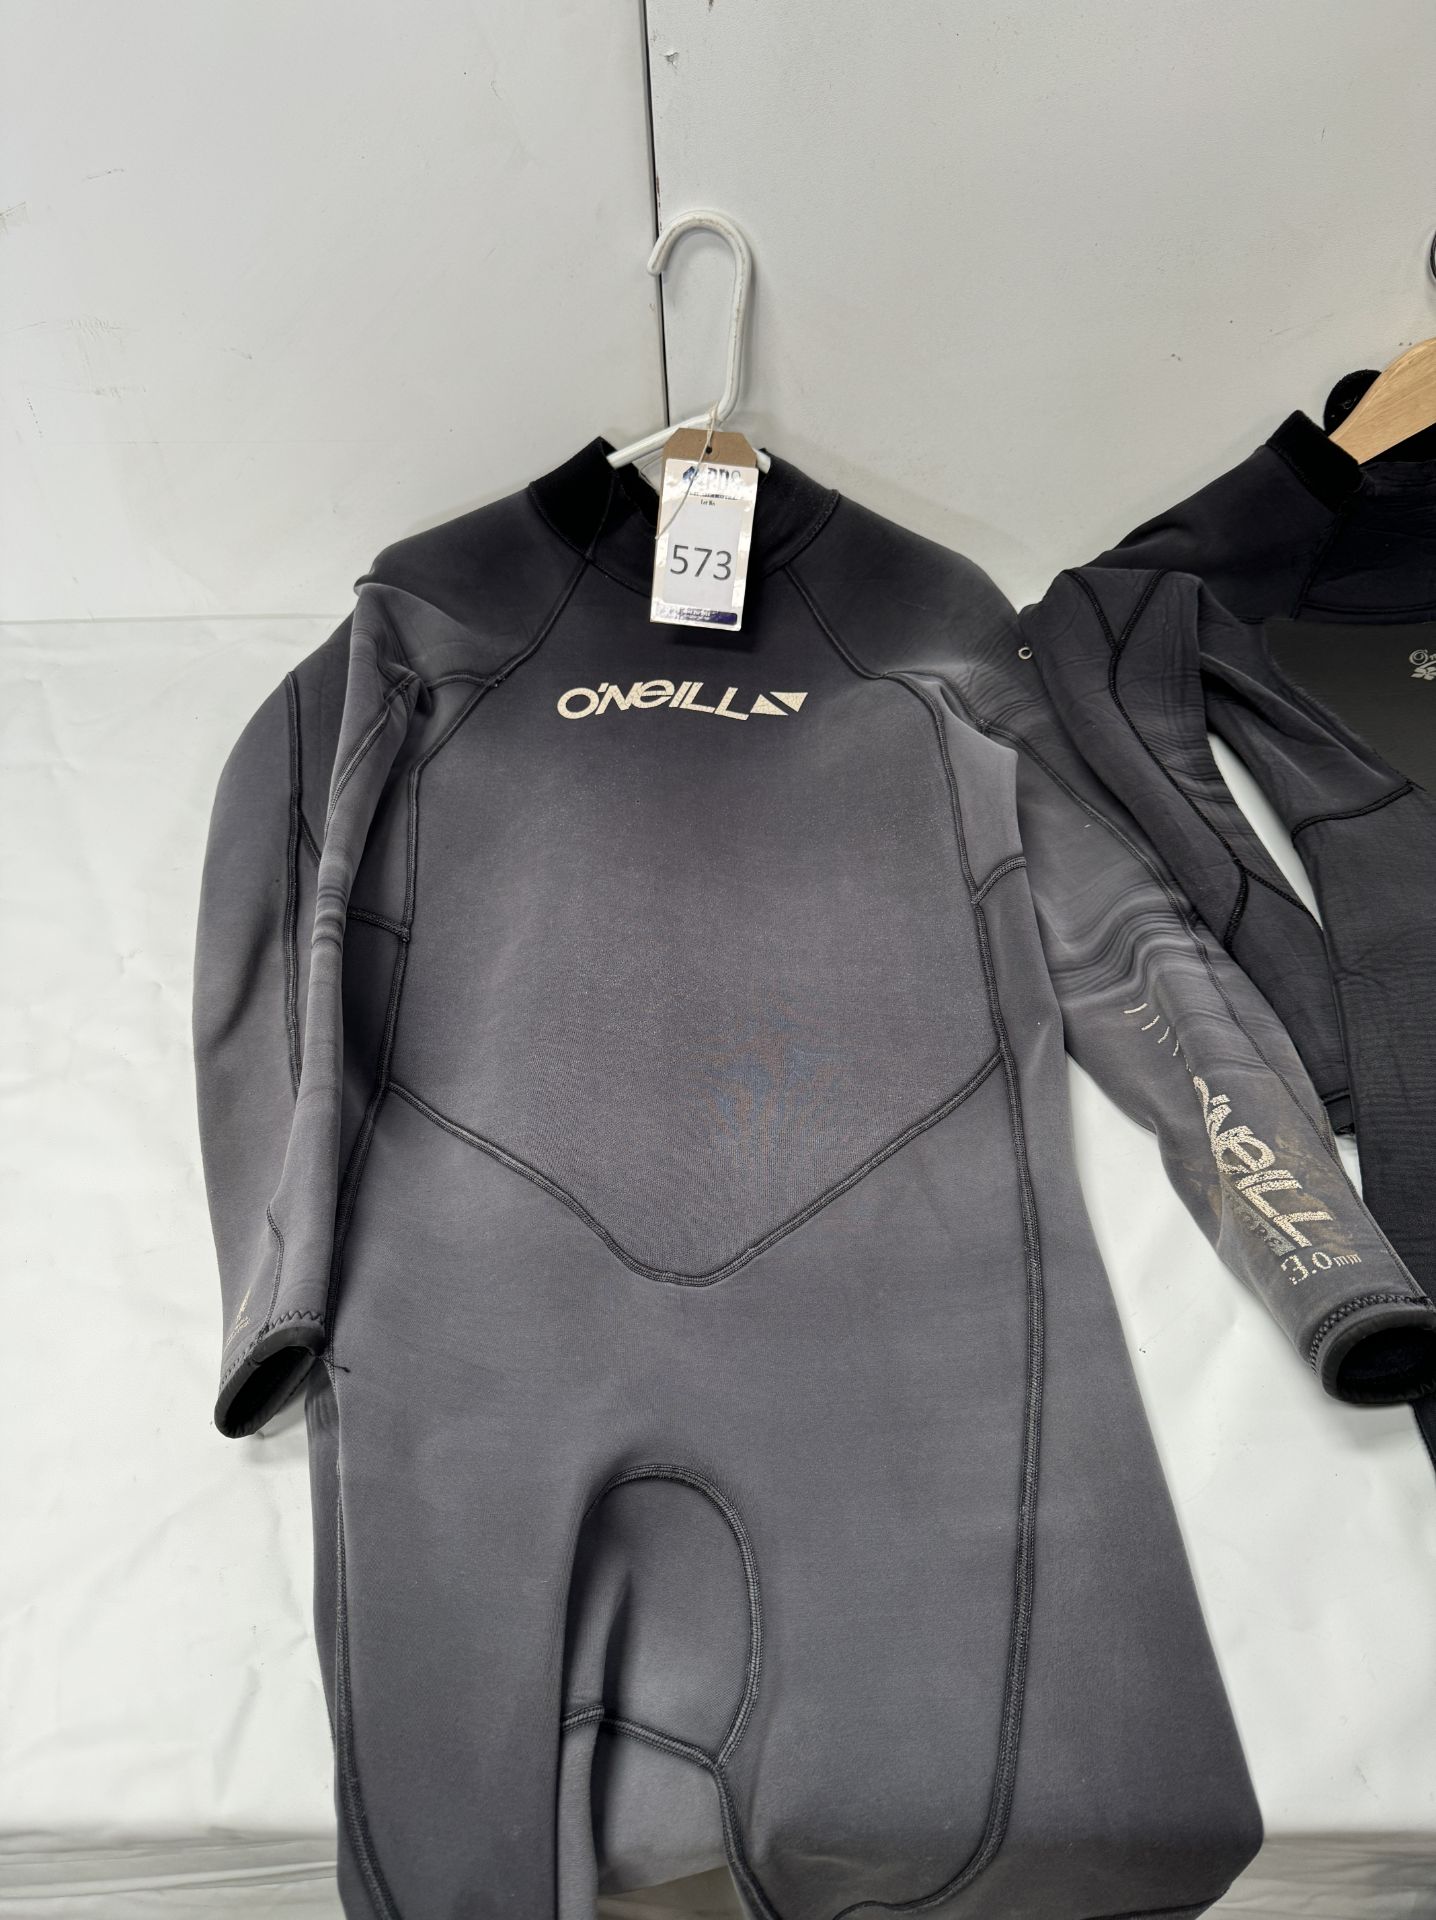 Six O’Neill, Beuchat, Seac Wetsuits (Location: Brentwood. Please Refer to General Notes) - Image 6 of 18